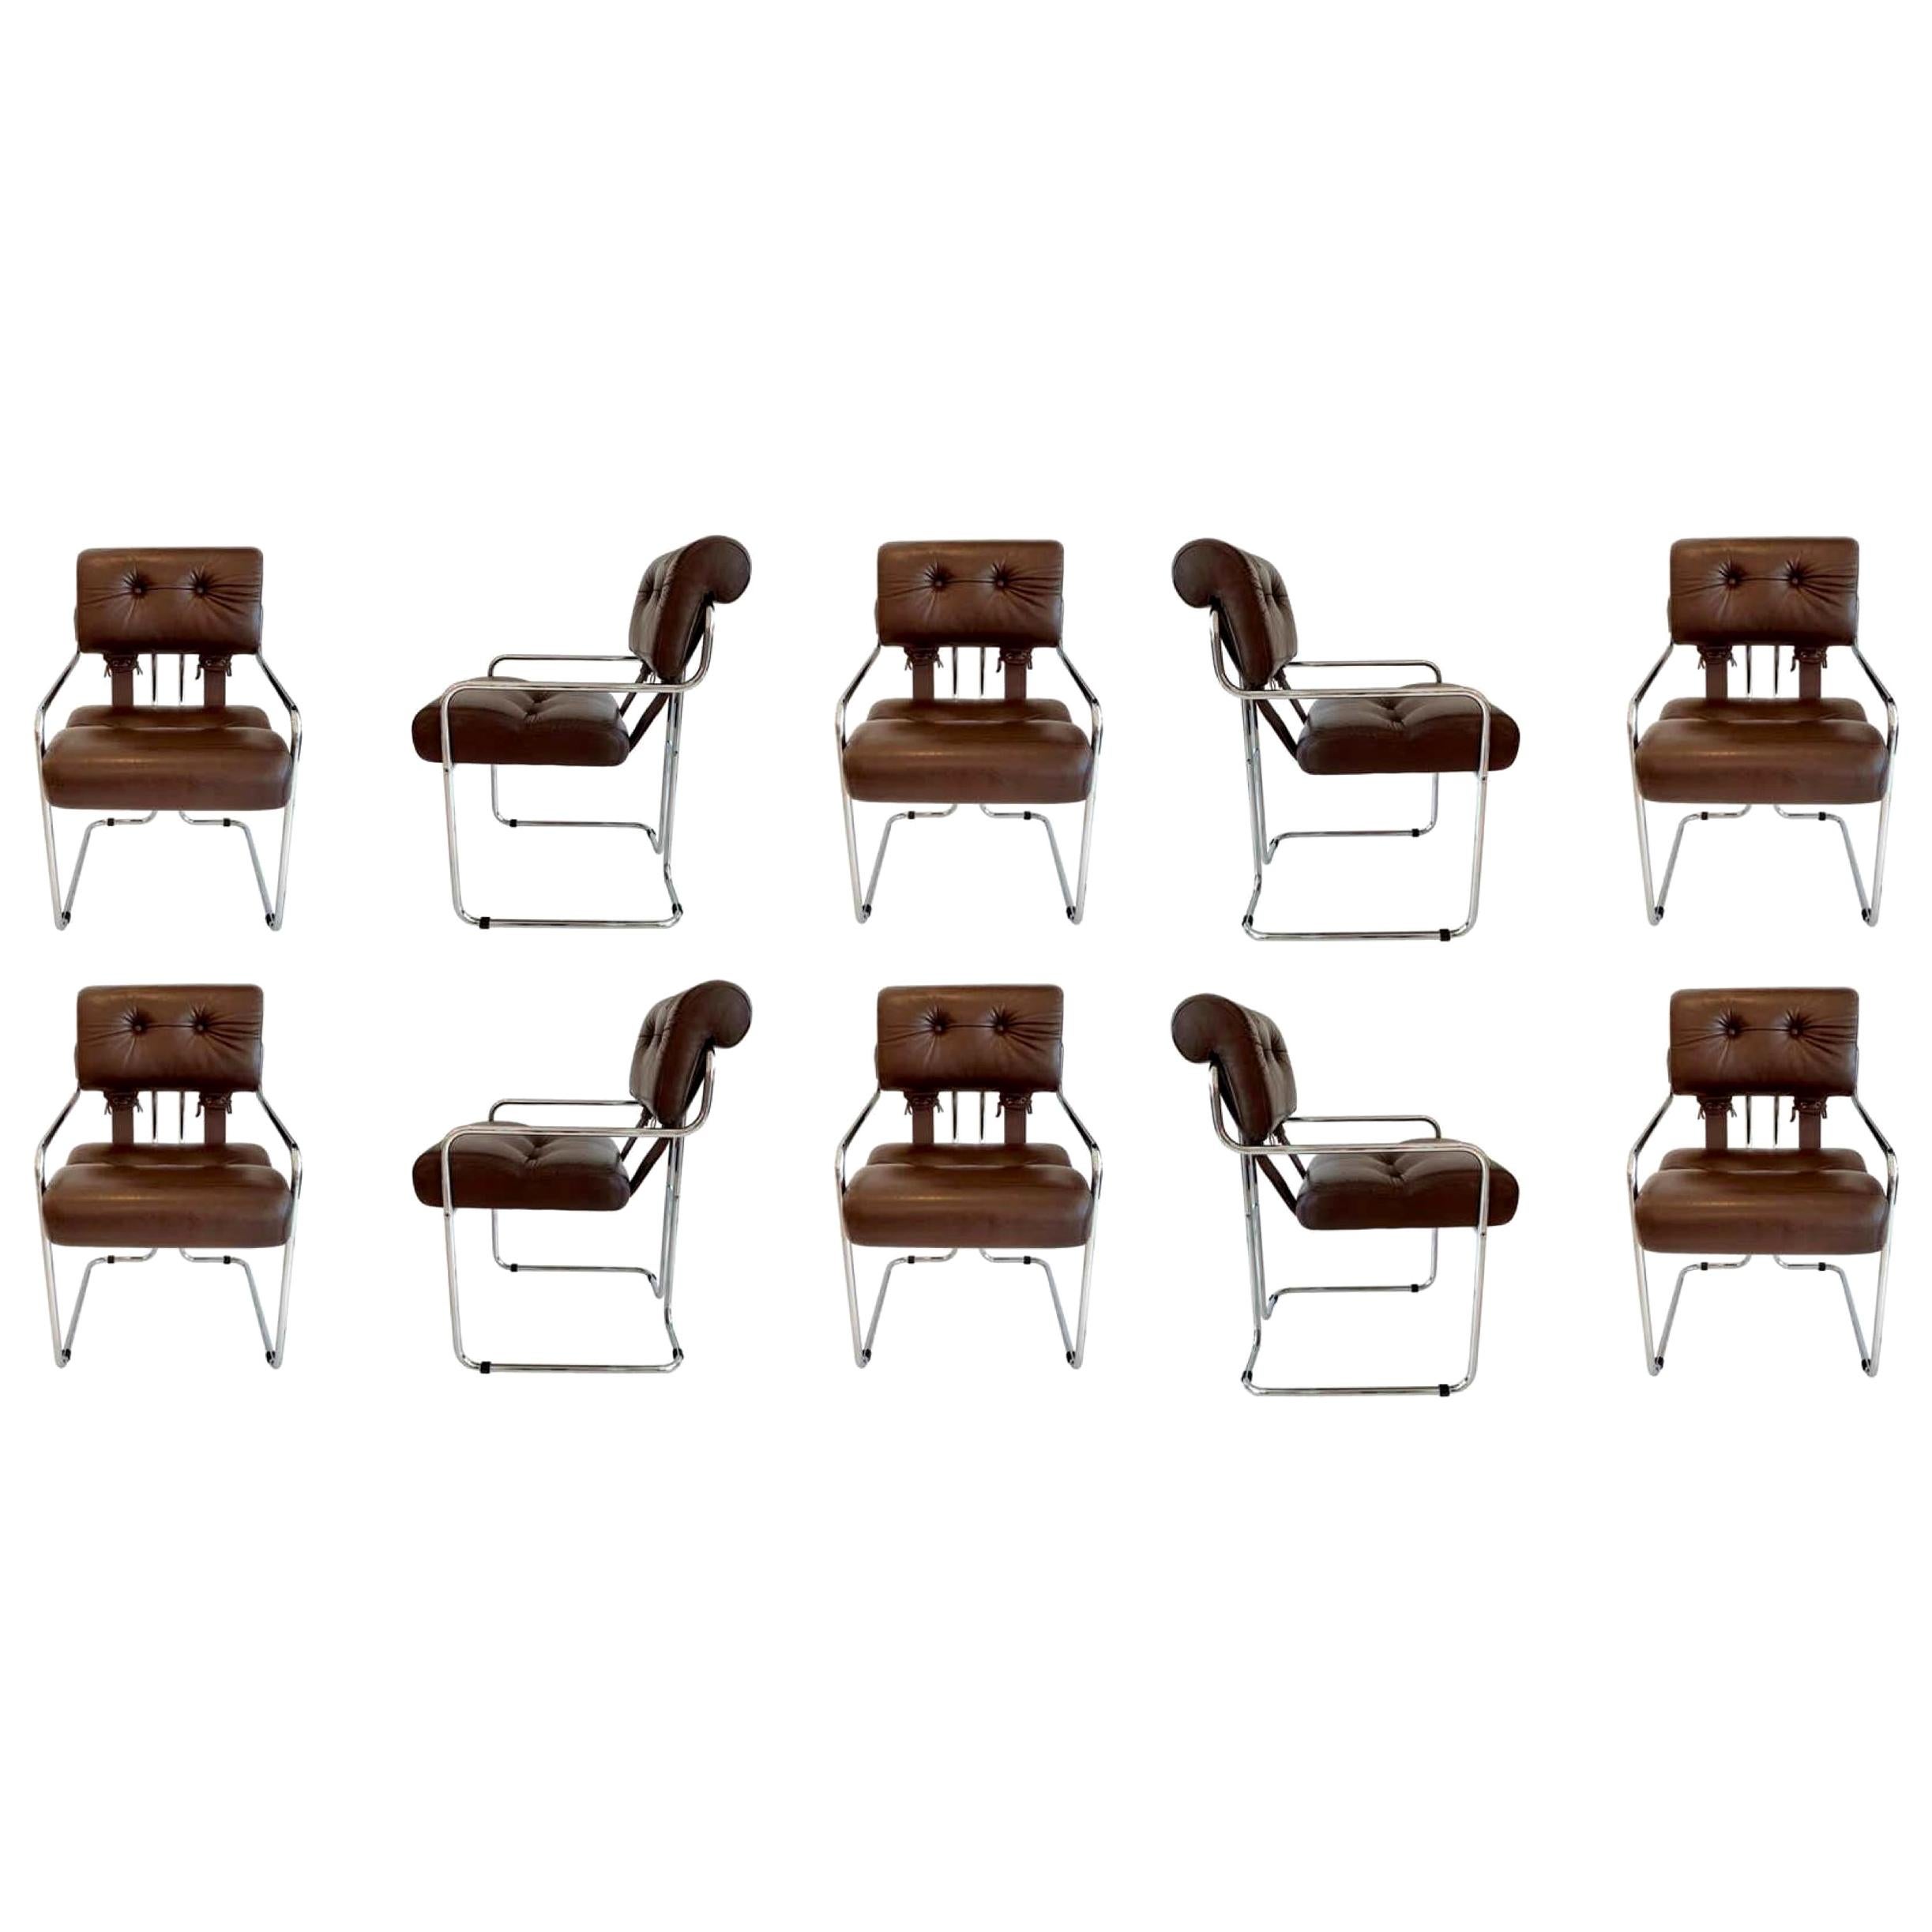 Set of 10 Tucroma Chairs in Brown Leather by Guido Faleschini